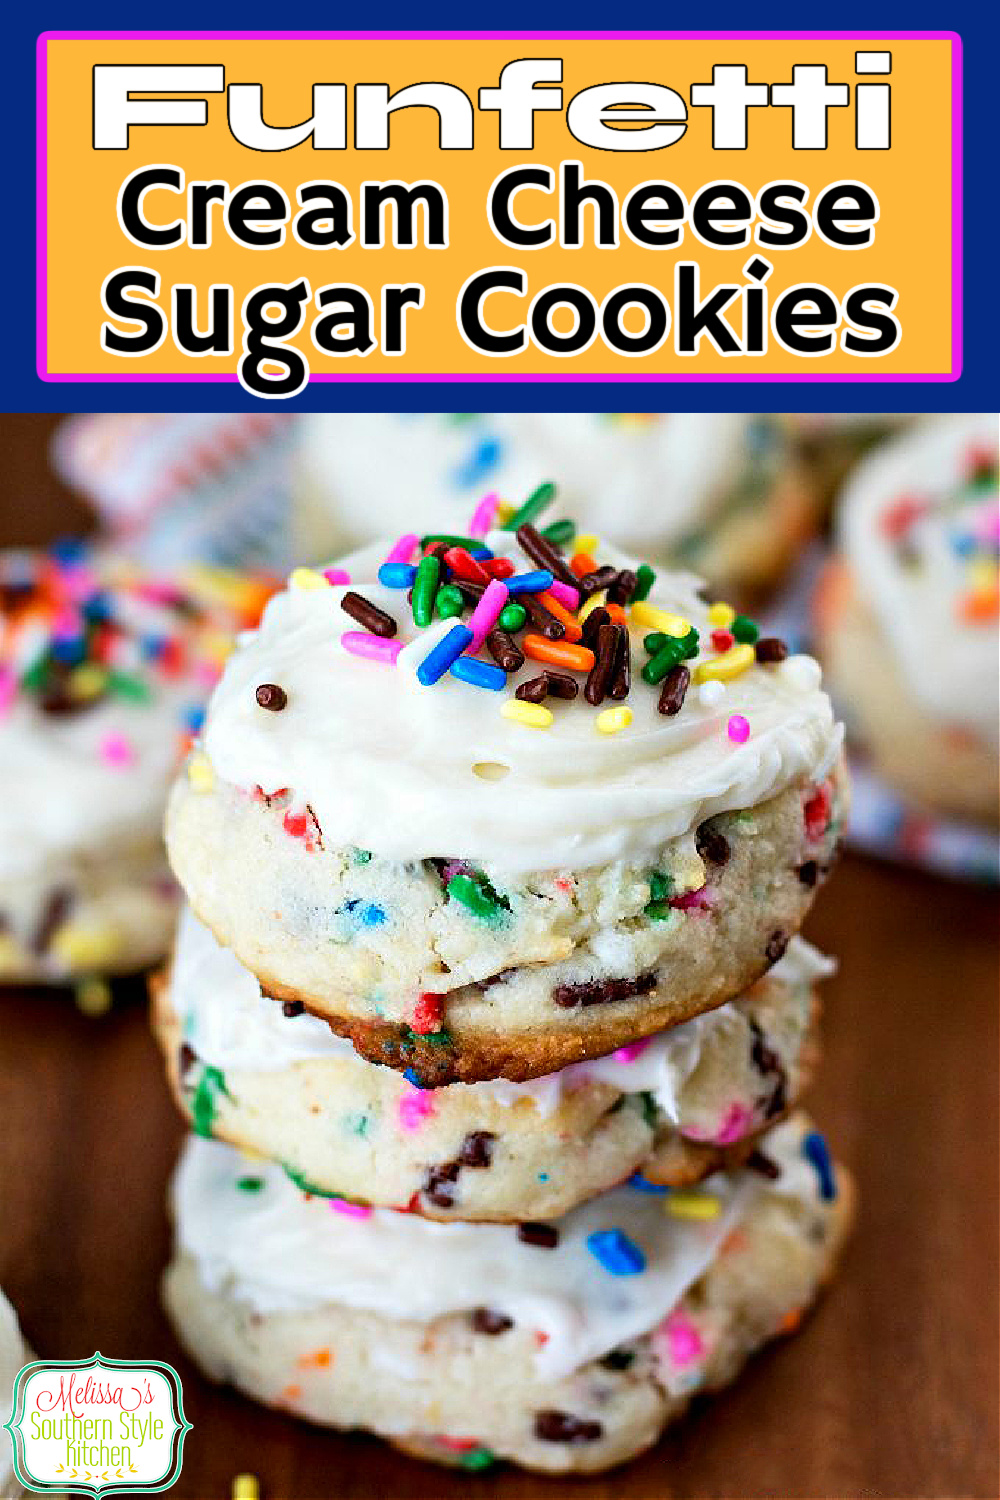 These Funfetti Cream Cheese Sugar Cookies are like a party in your mouth #sugarcookierecipes #funfettisugarcookies #cookierecipes #sugarcookies #creamcheesesugarcookies #desserts #christmascookies #birthdayparty #southernrecipes #sprinklescookies via @melissasssk